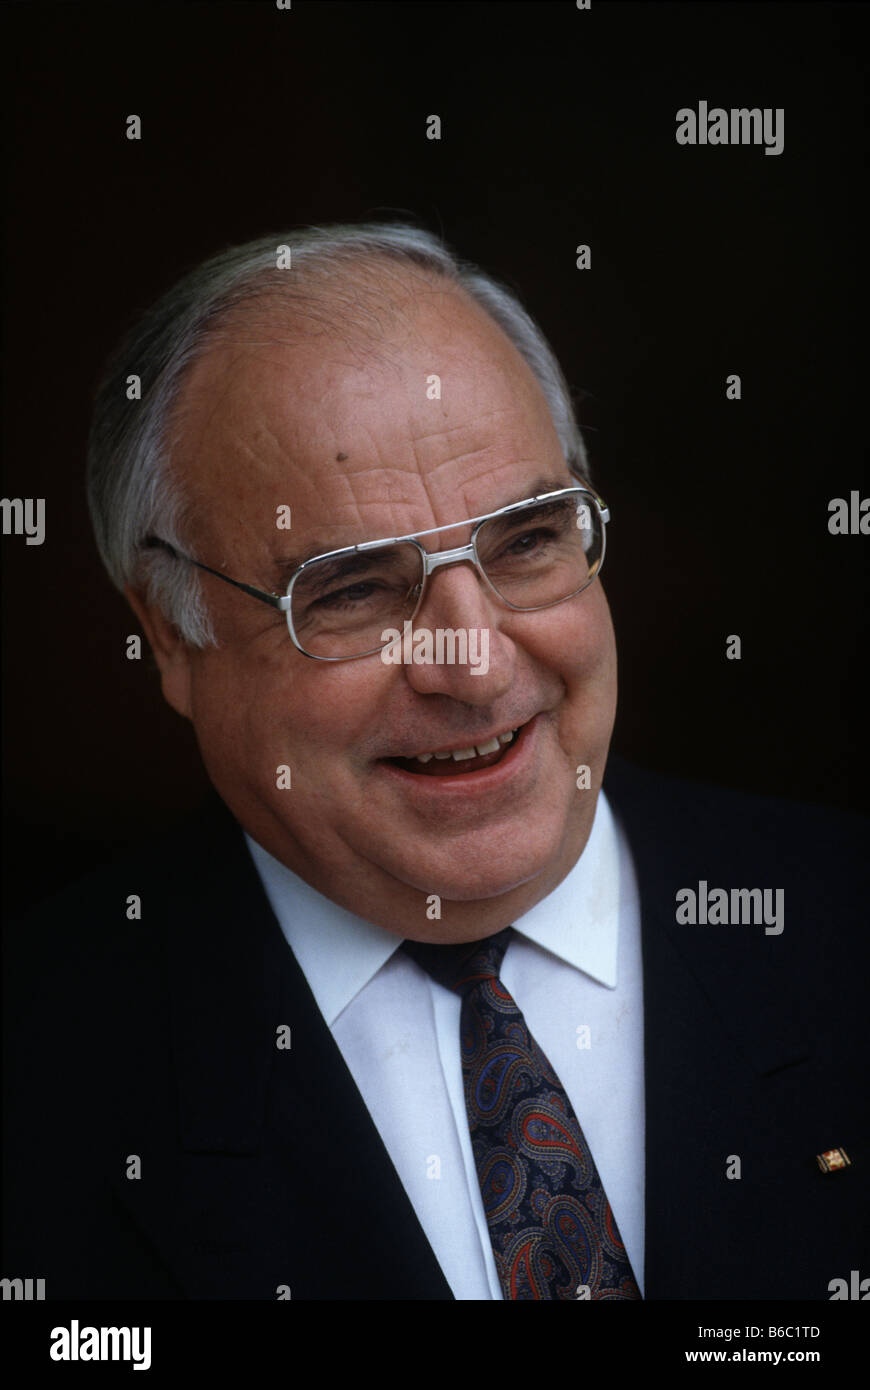 Helmut Kohl, German politician photographed in Bonn Germany during his time as Chancellor of Germany. Stock Photo